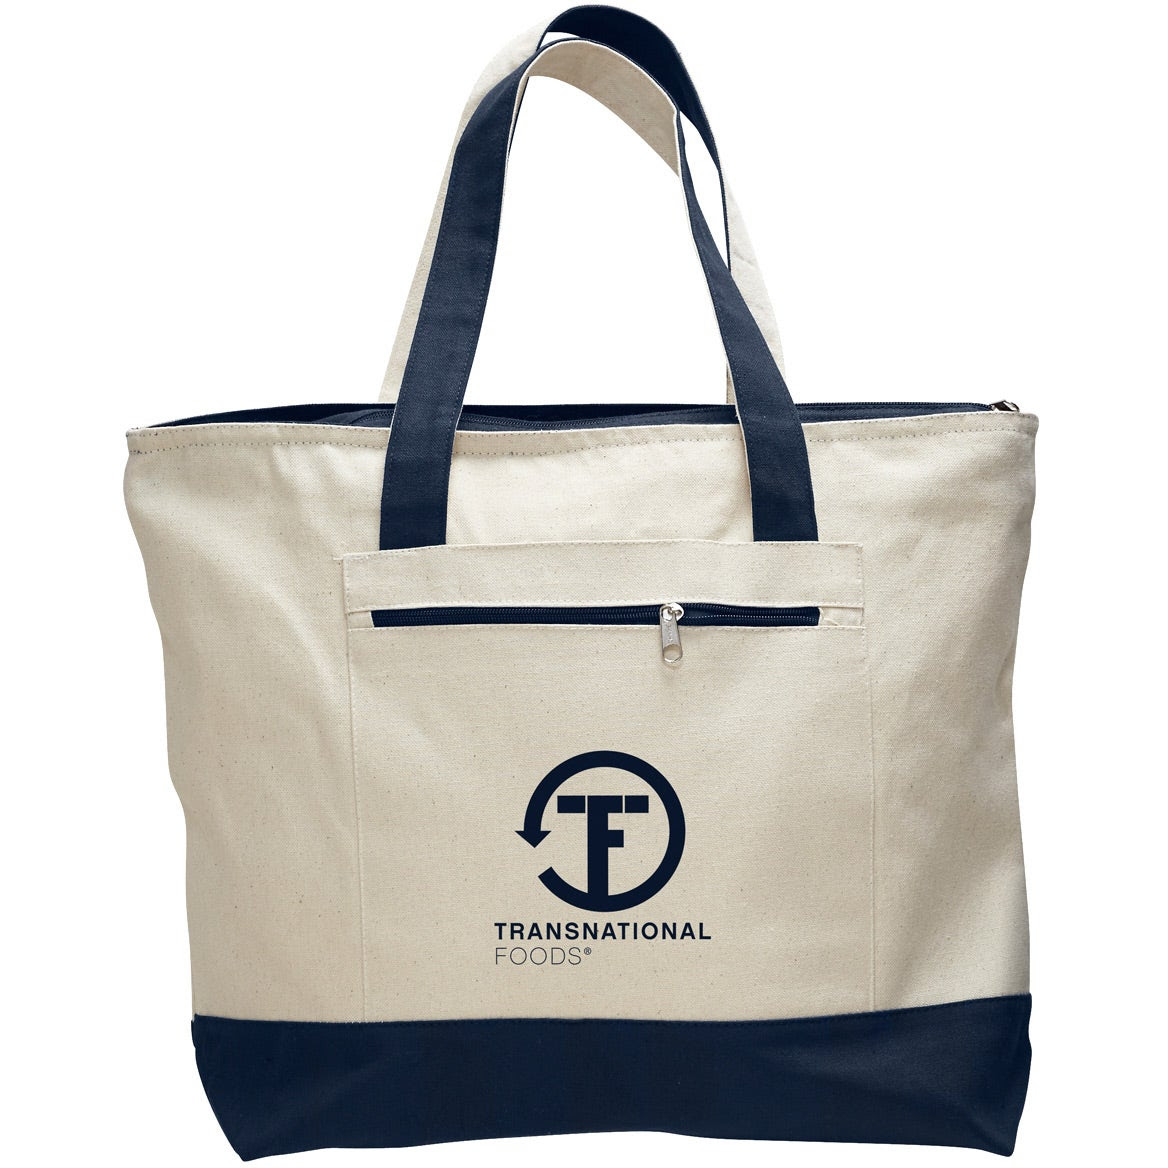 Body Cross : Personalized Tote Bags With Zipper